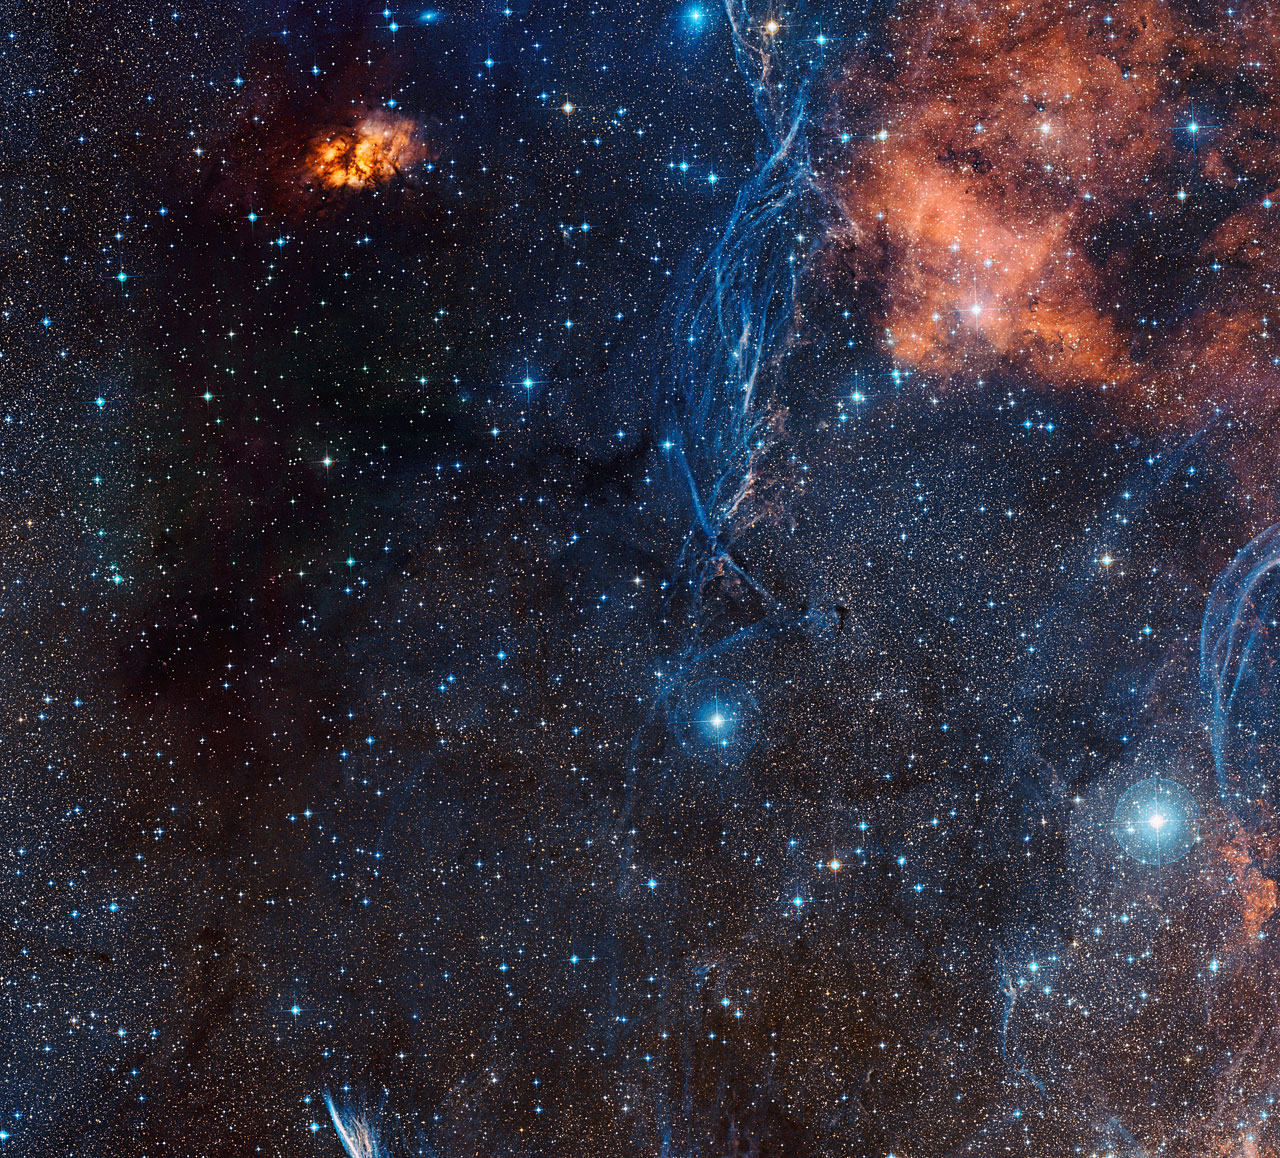 The rich celestial landscape around the aging double star IRAS 0